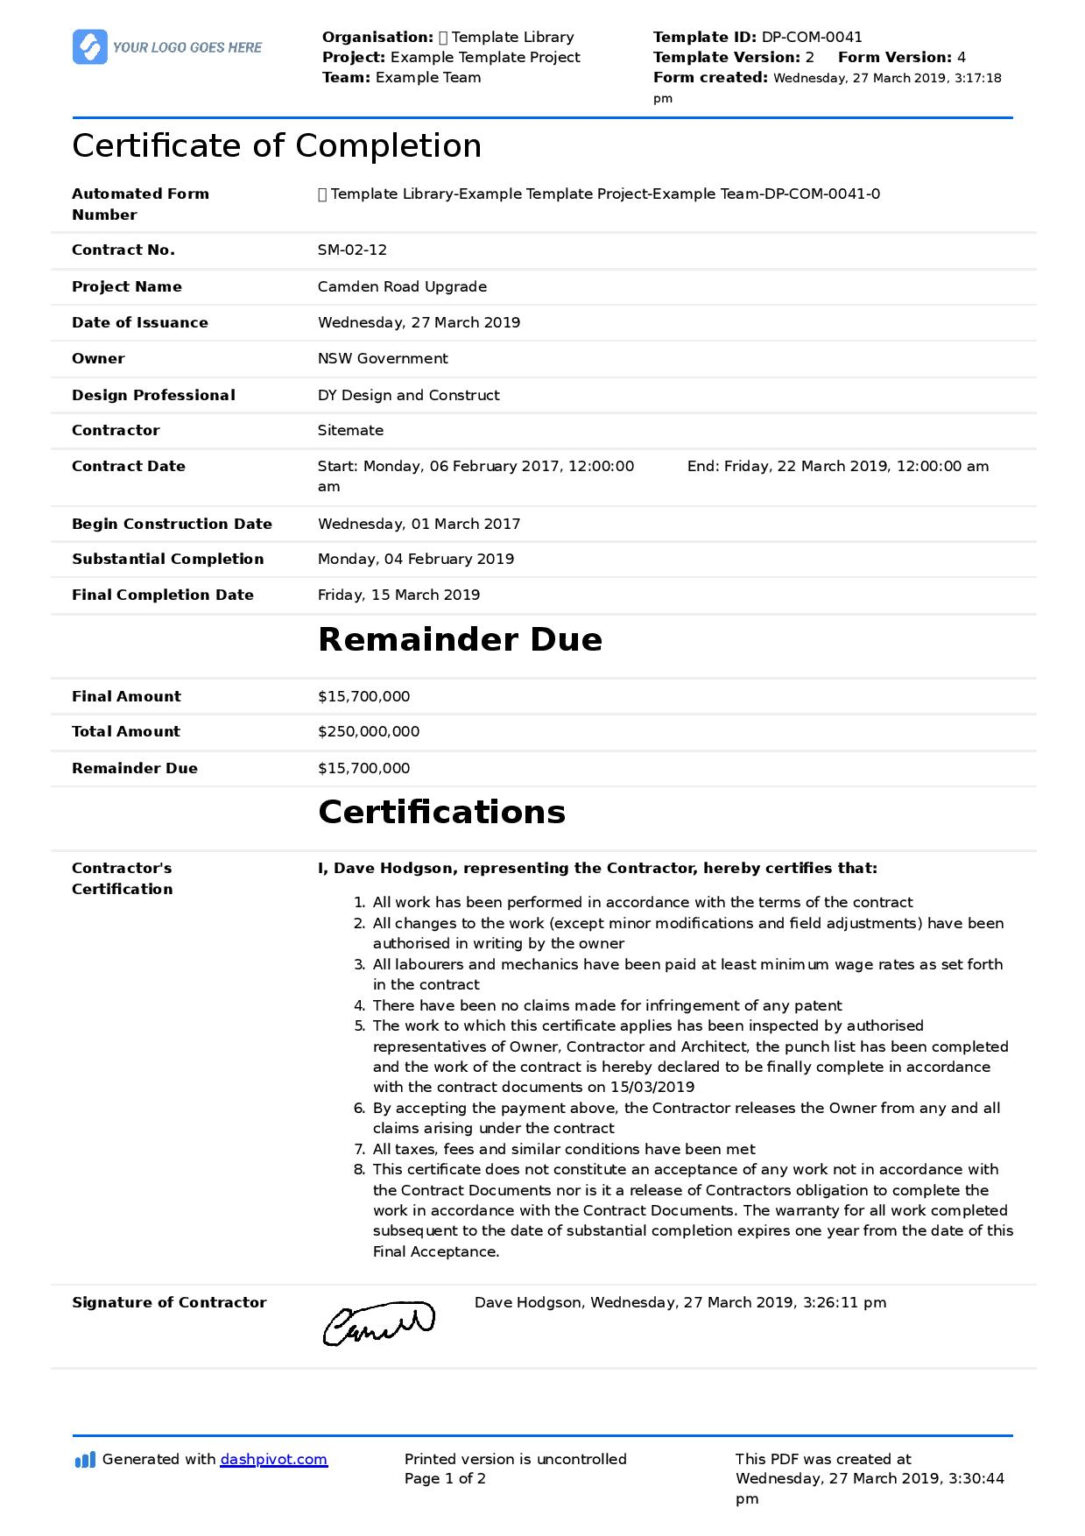 Certificate Of Completion For Construction (Free Template + Inside intended for Free Certificate Of Construction Completion